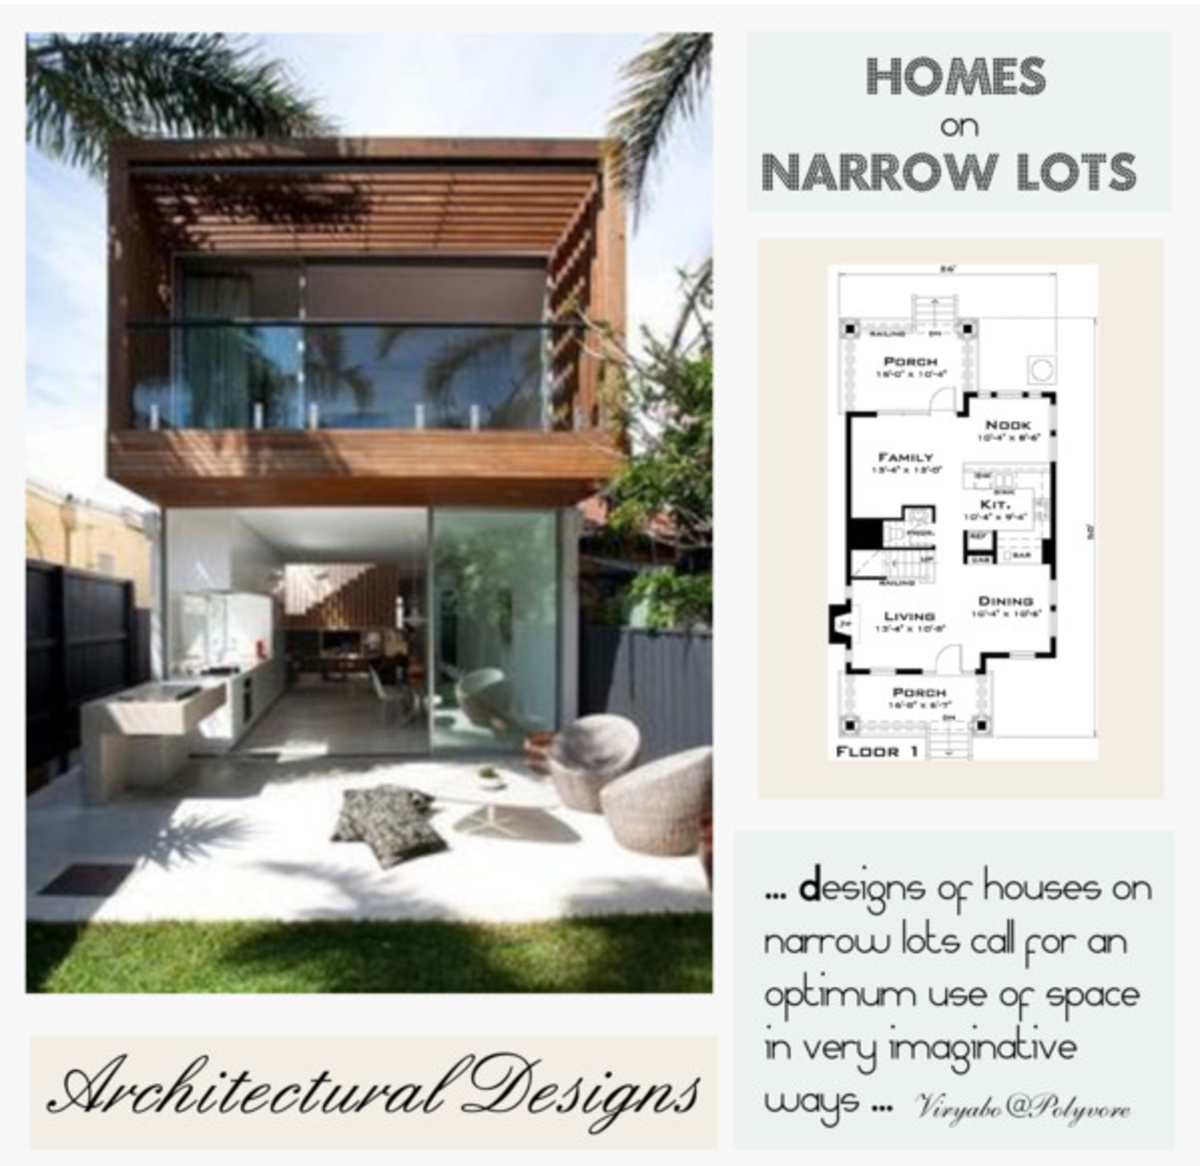 Built on a narrow lot, this modern house design is just the right size for those who want to downsize. You can find plans and blueprints for this lovely home online.